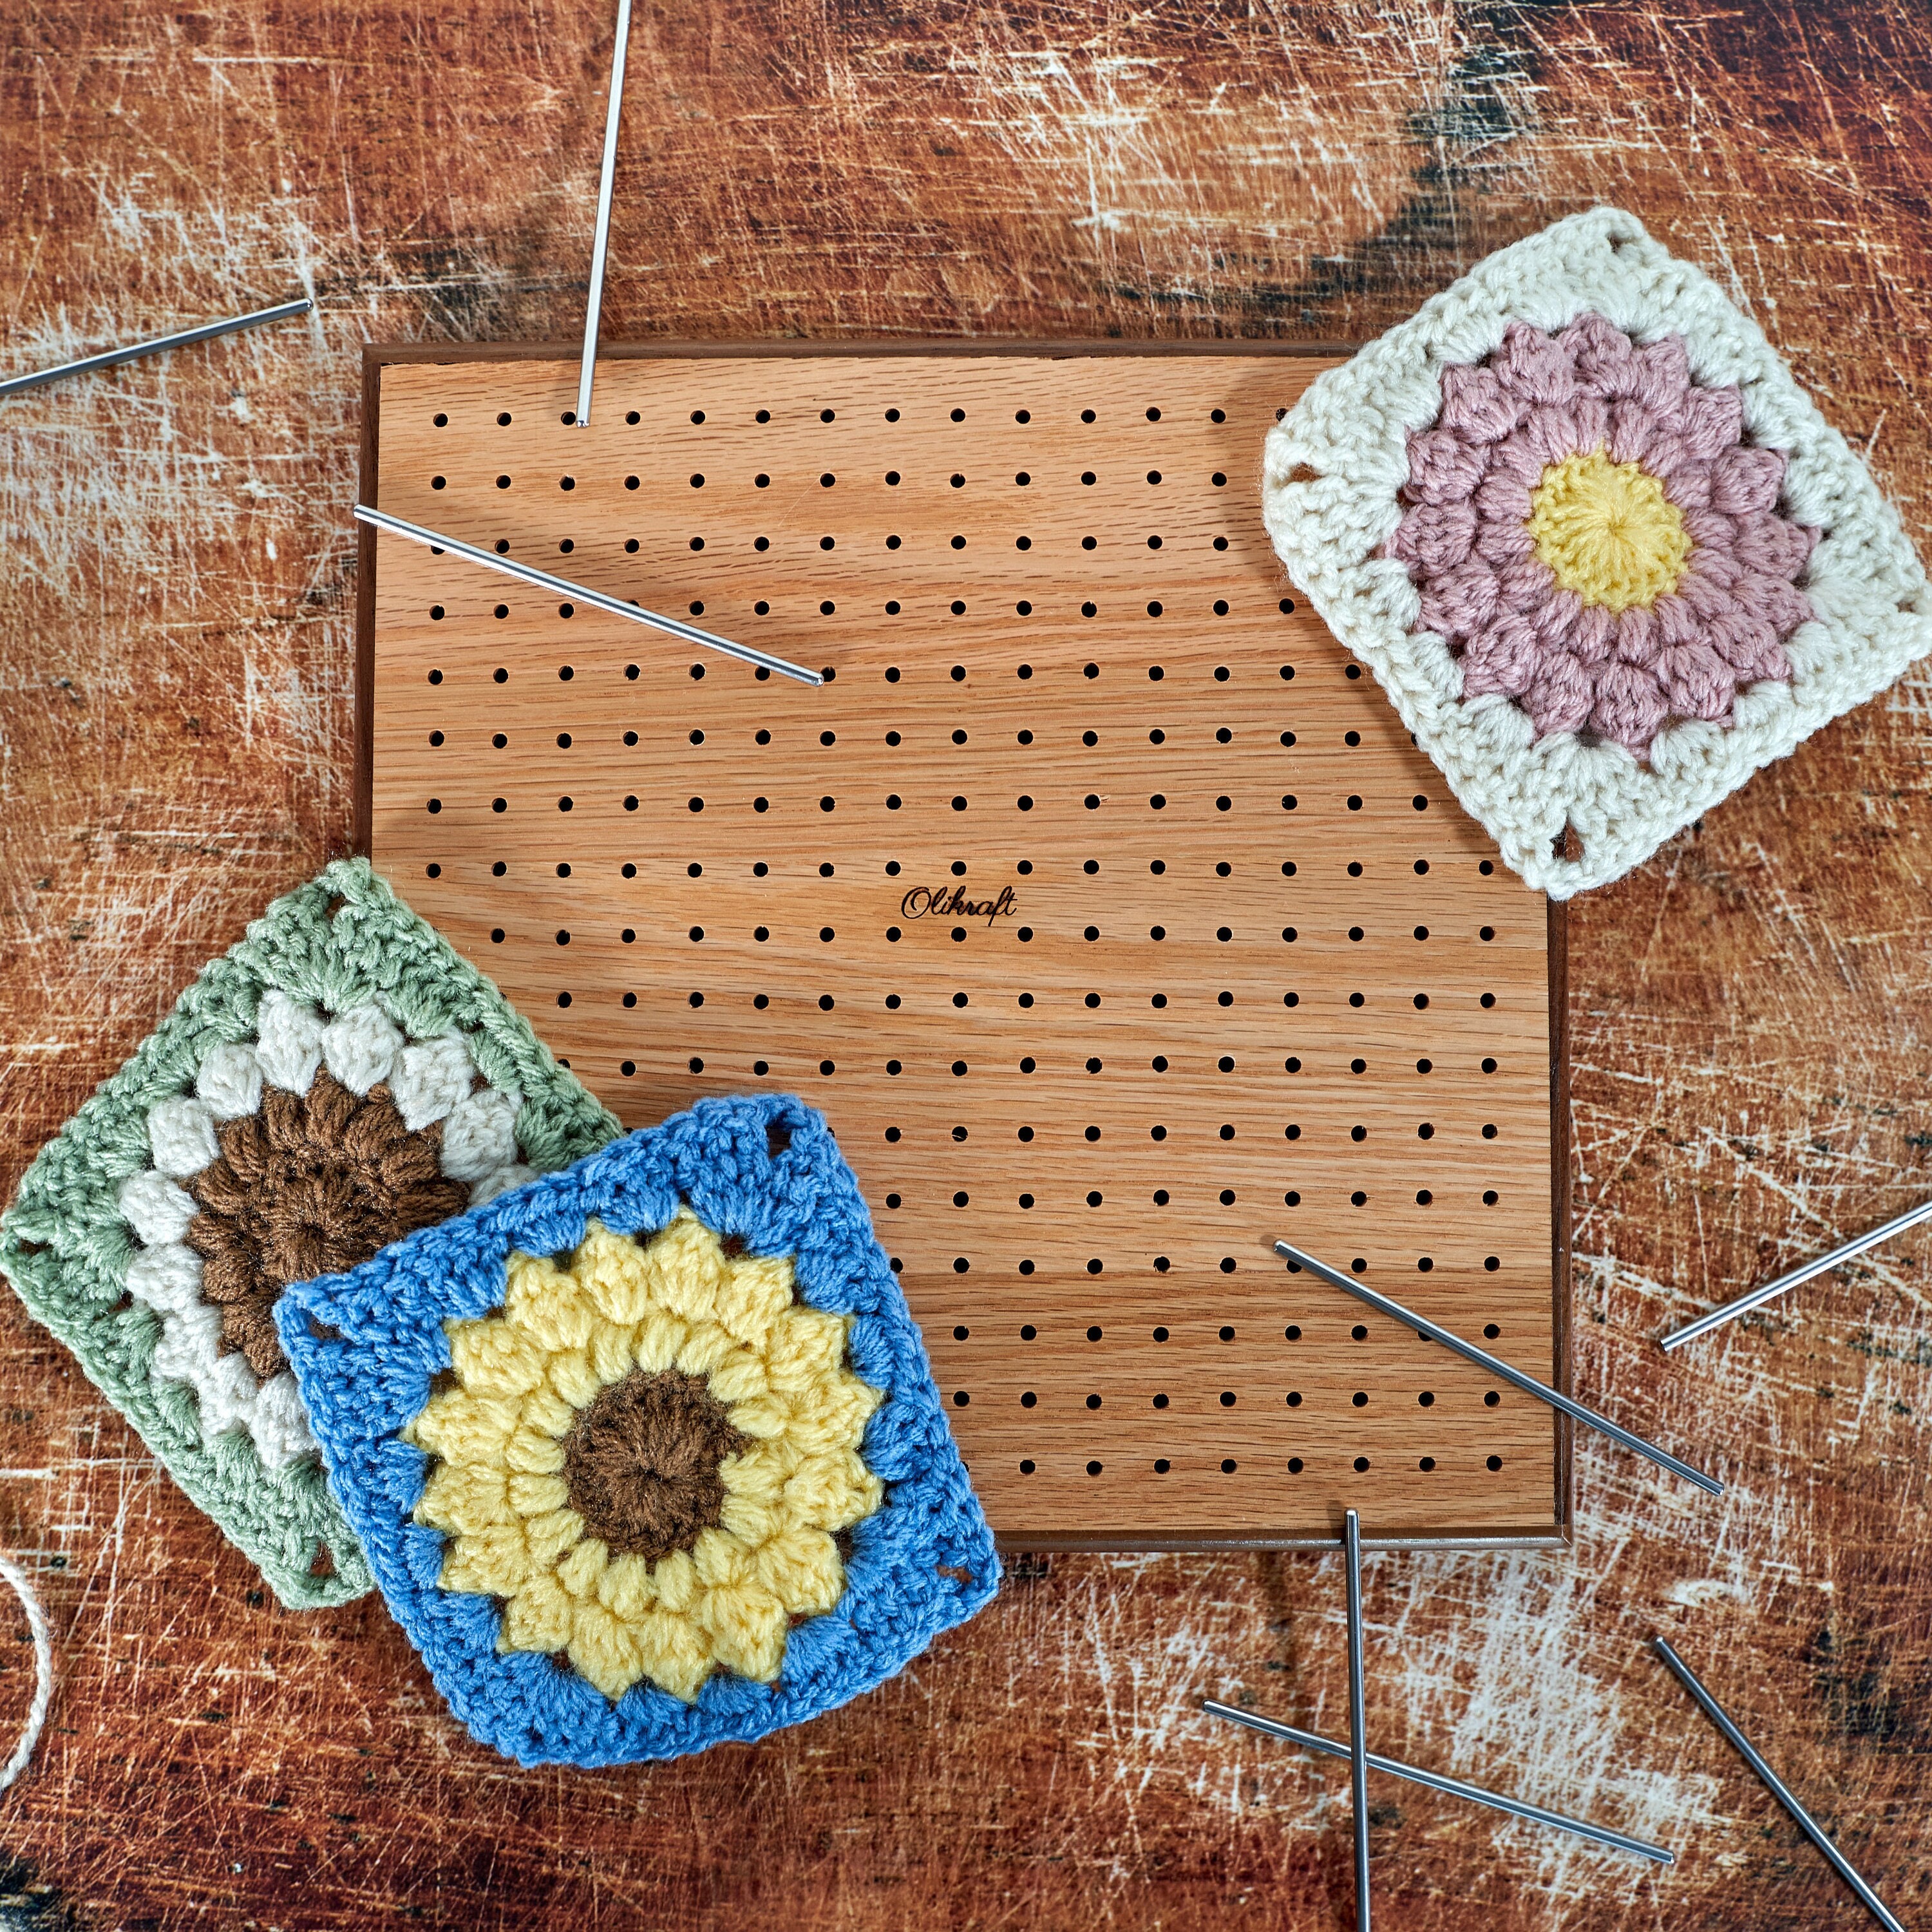  11x11 inch Blocking Board for Crocheting, Square Wooden  Blocking Board with 15pcs Stainless Steel Pins for Mothers Grandmothers  Knitting Blocking Mat for Knitting Crochet Projects